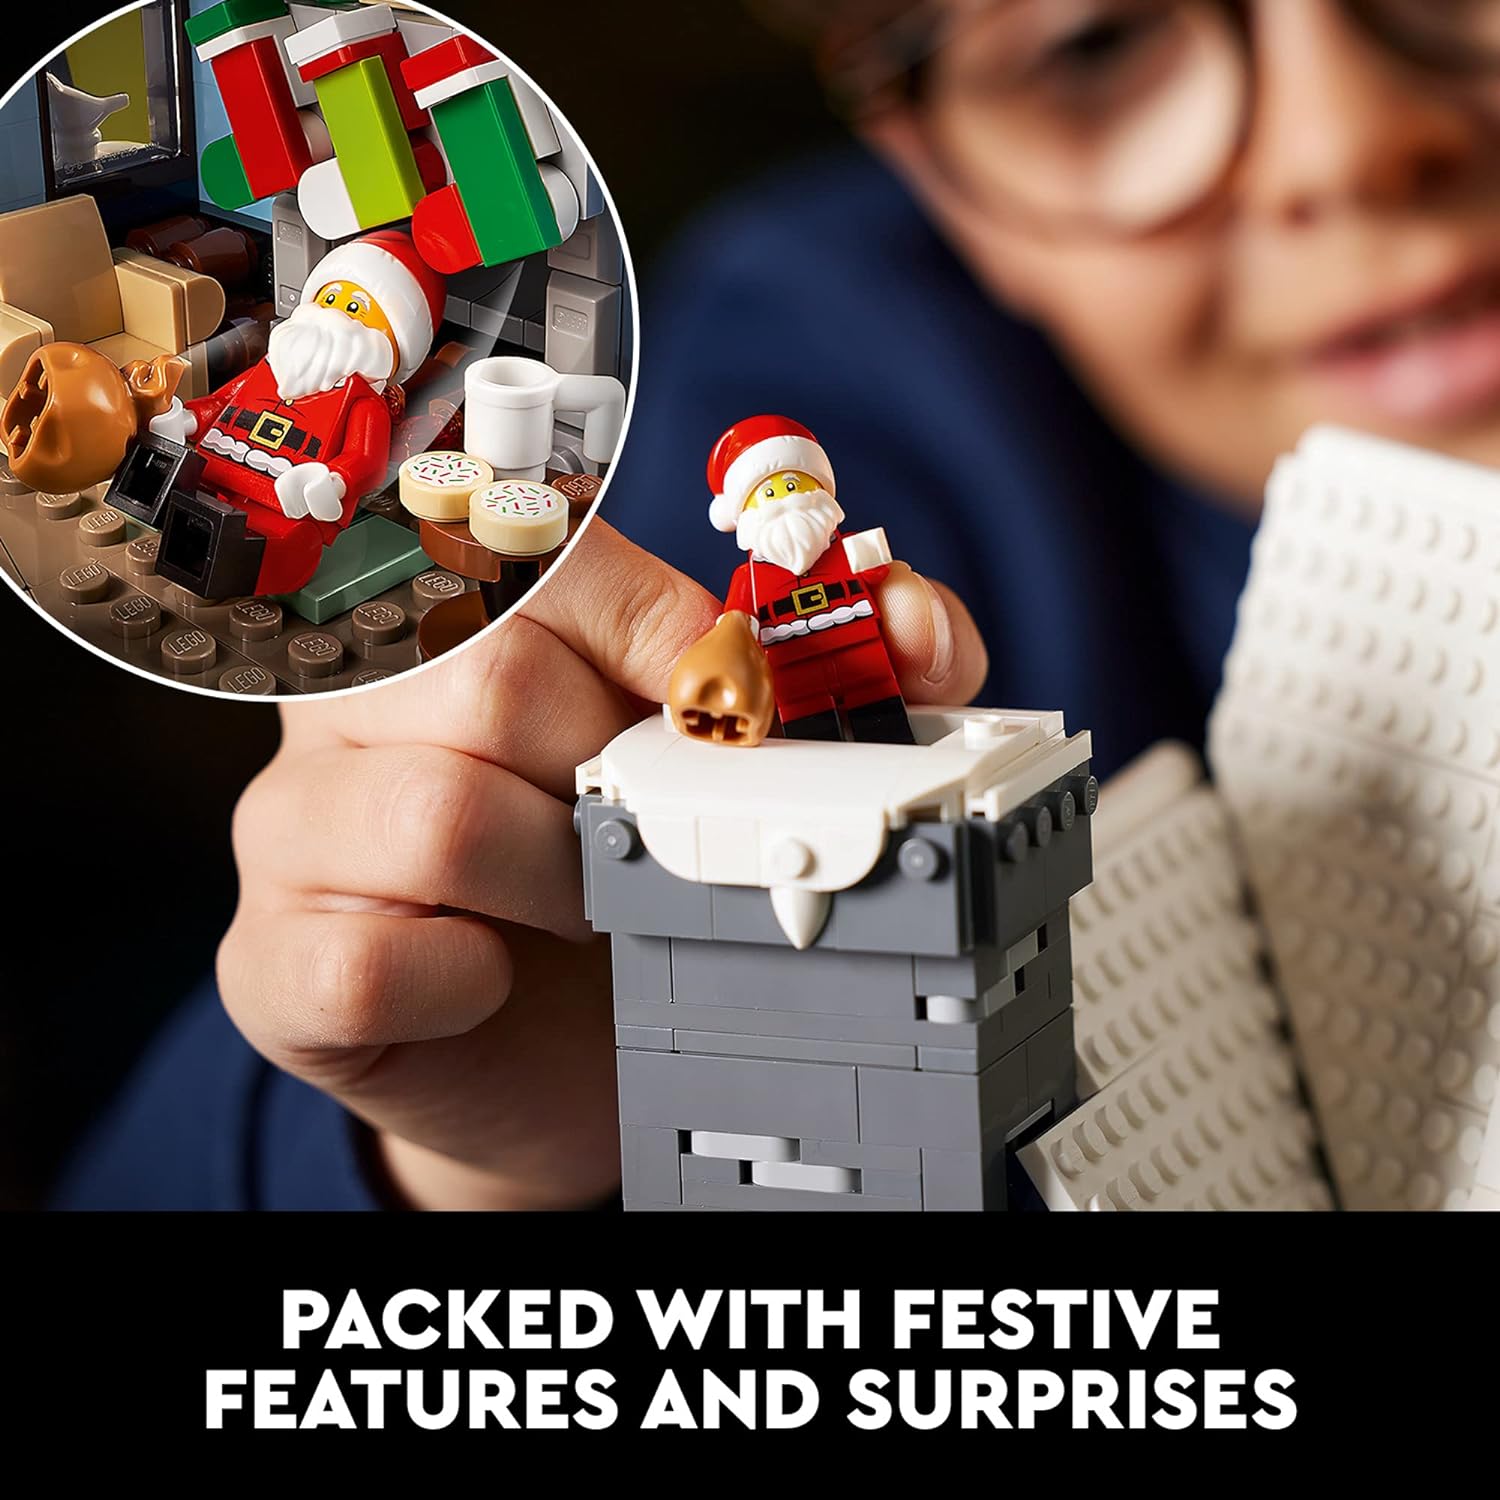 LEGO 10293  Icons Santa’s Visit Christmas House Model Building Set for Adults and Families, Festive Home Décor with Xmas Tree, Gift Idea